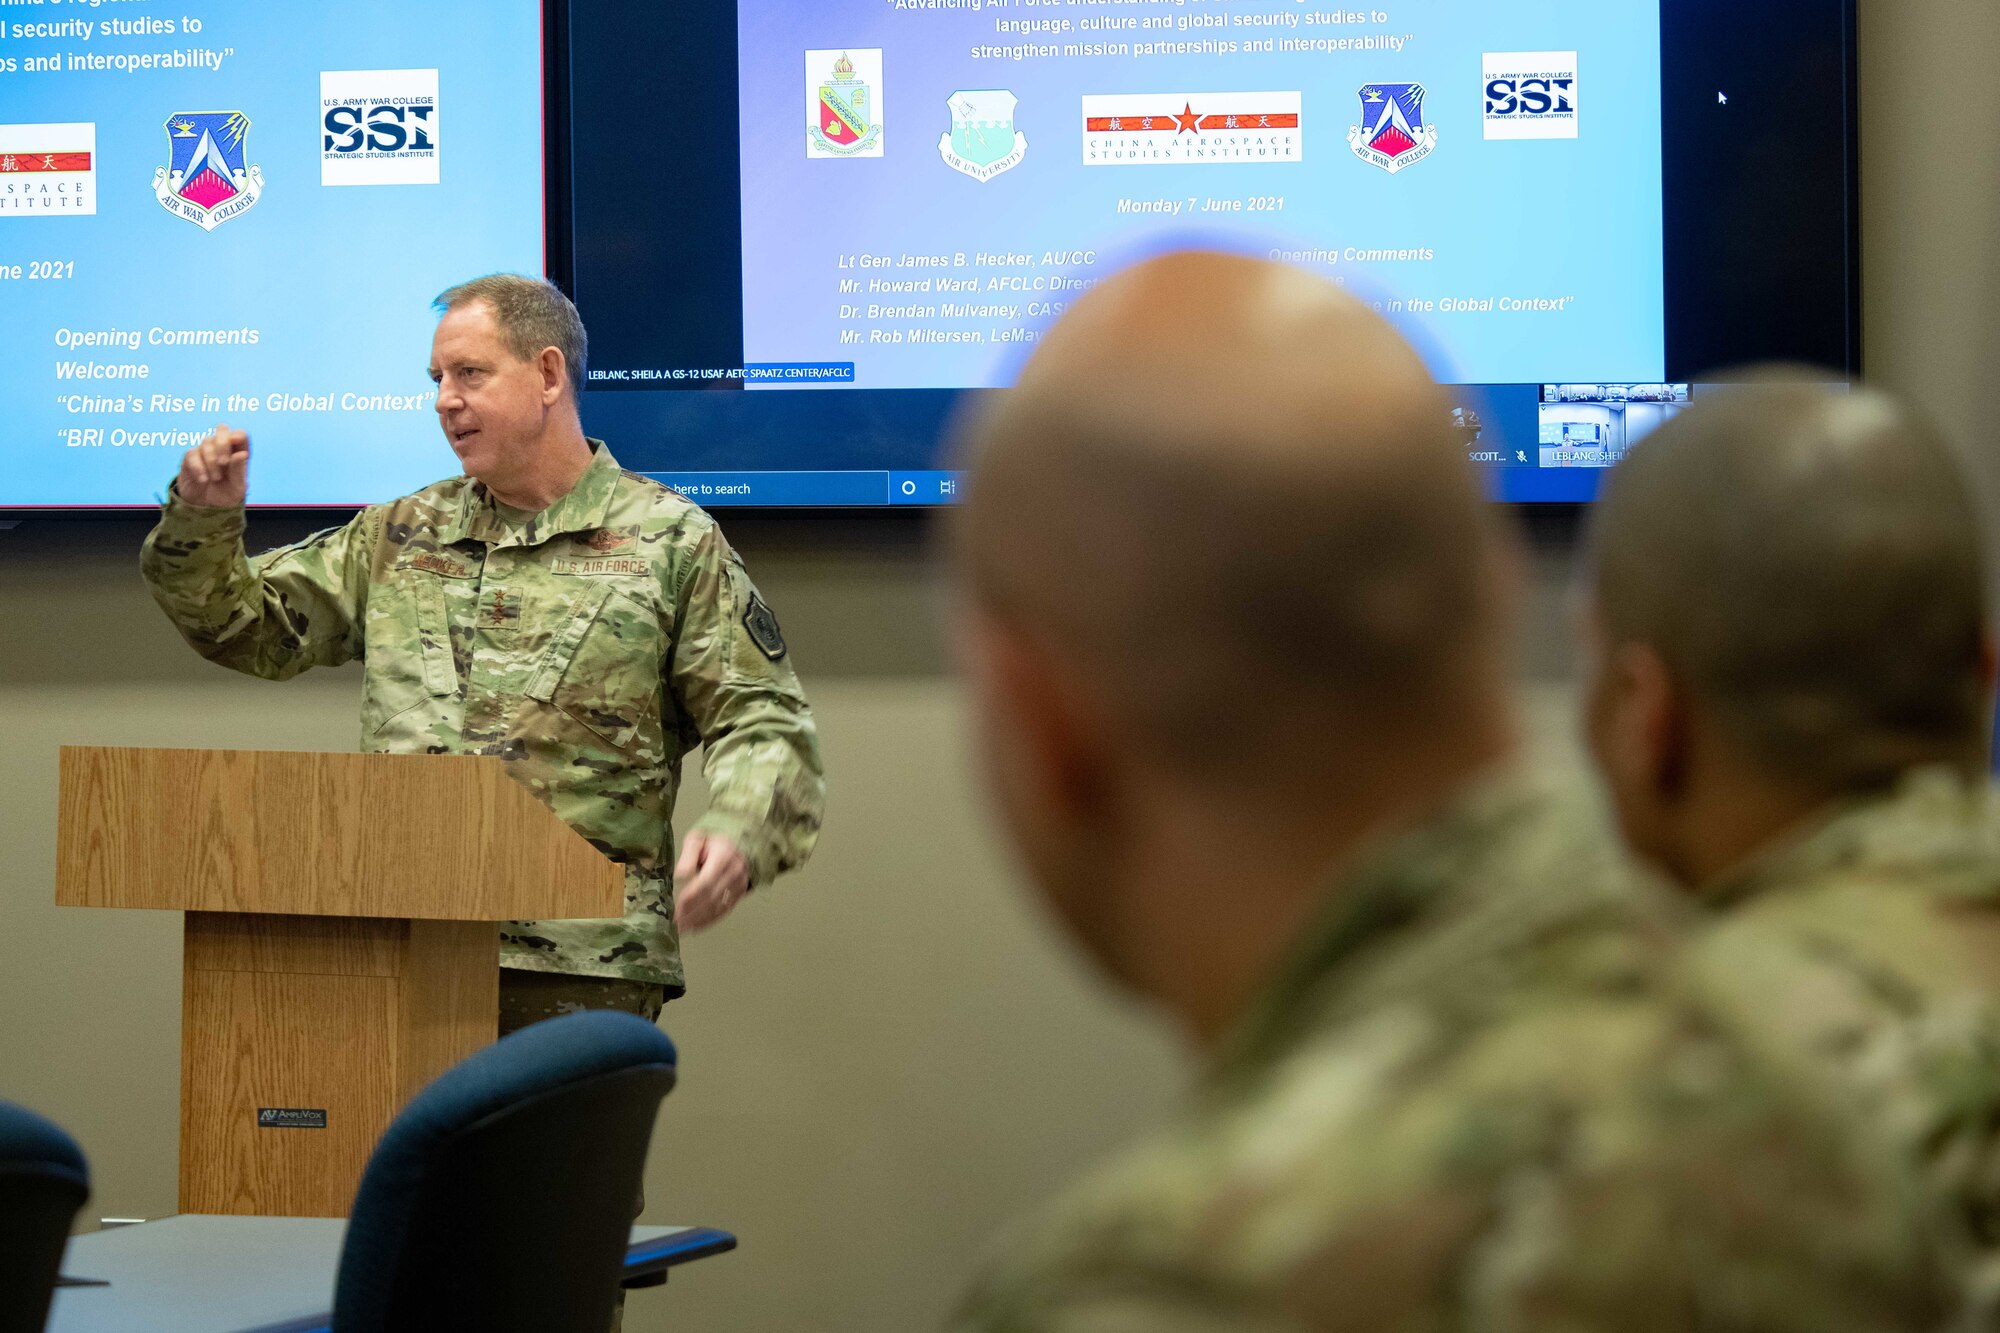 Lieutenant Gen. James Hecker, Air University commander and president, opens the inaugural China ‘Belt and Road Initiative’ training event, June 7, 2021, at the AU Teaching and Learning Center, Maxwell Air Force Base, Alabama.